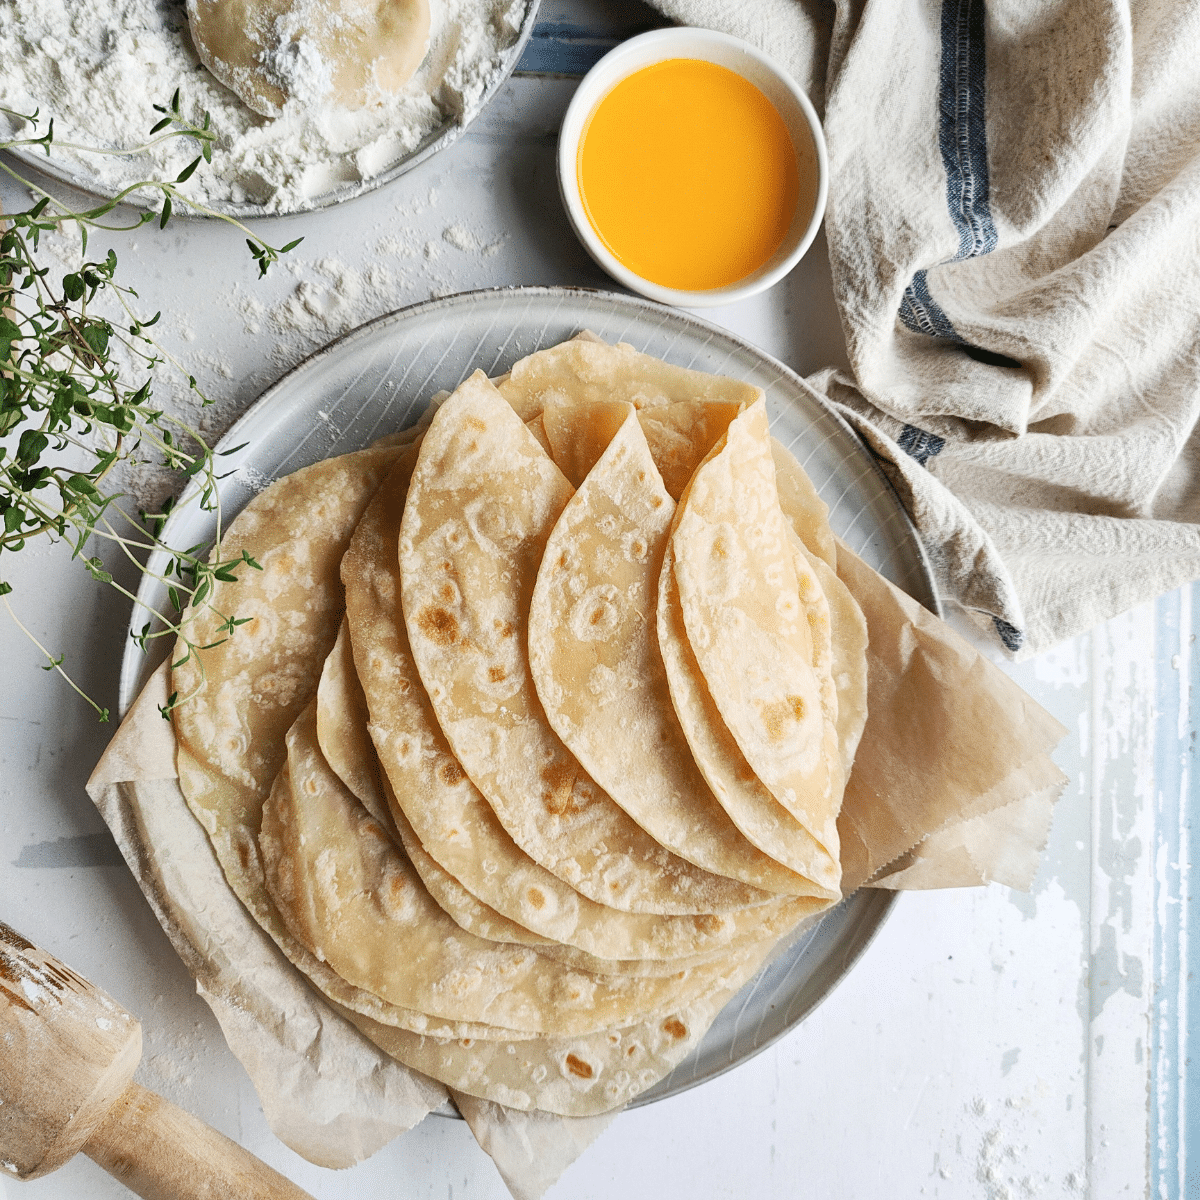 Easy, Soft Indian Flatbread also known as roti or chapati pairs perfectly with your favorite curry dishes. Made with just 4 ingredients, they're quick and simple to make. And the best part is, you don't need yeast!